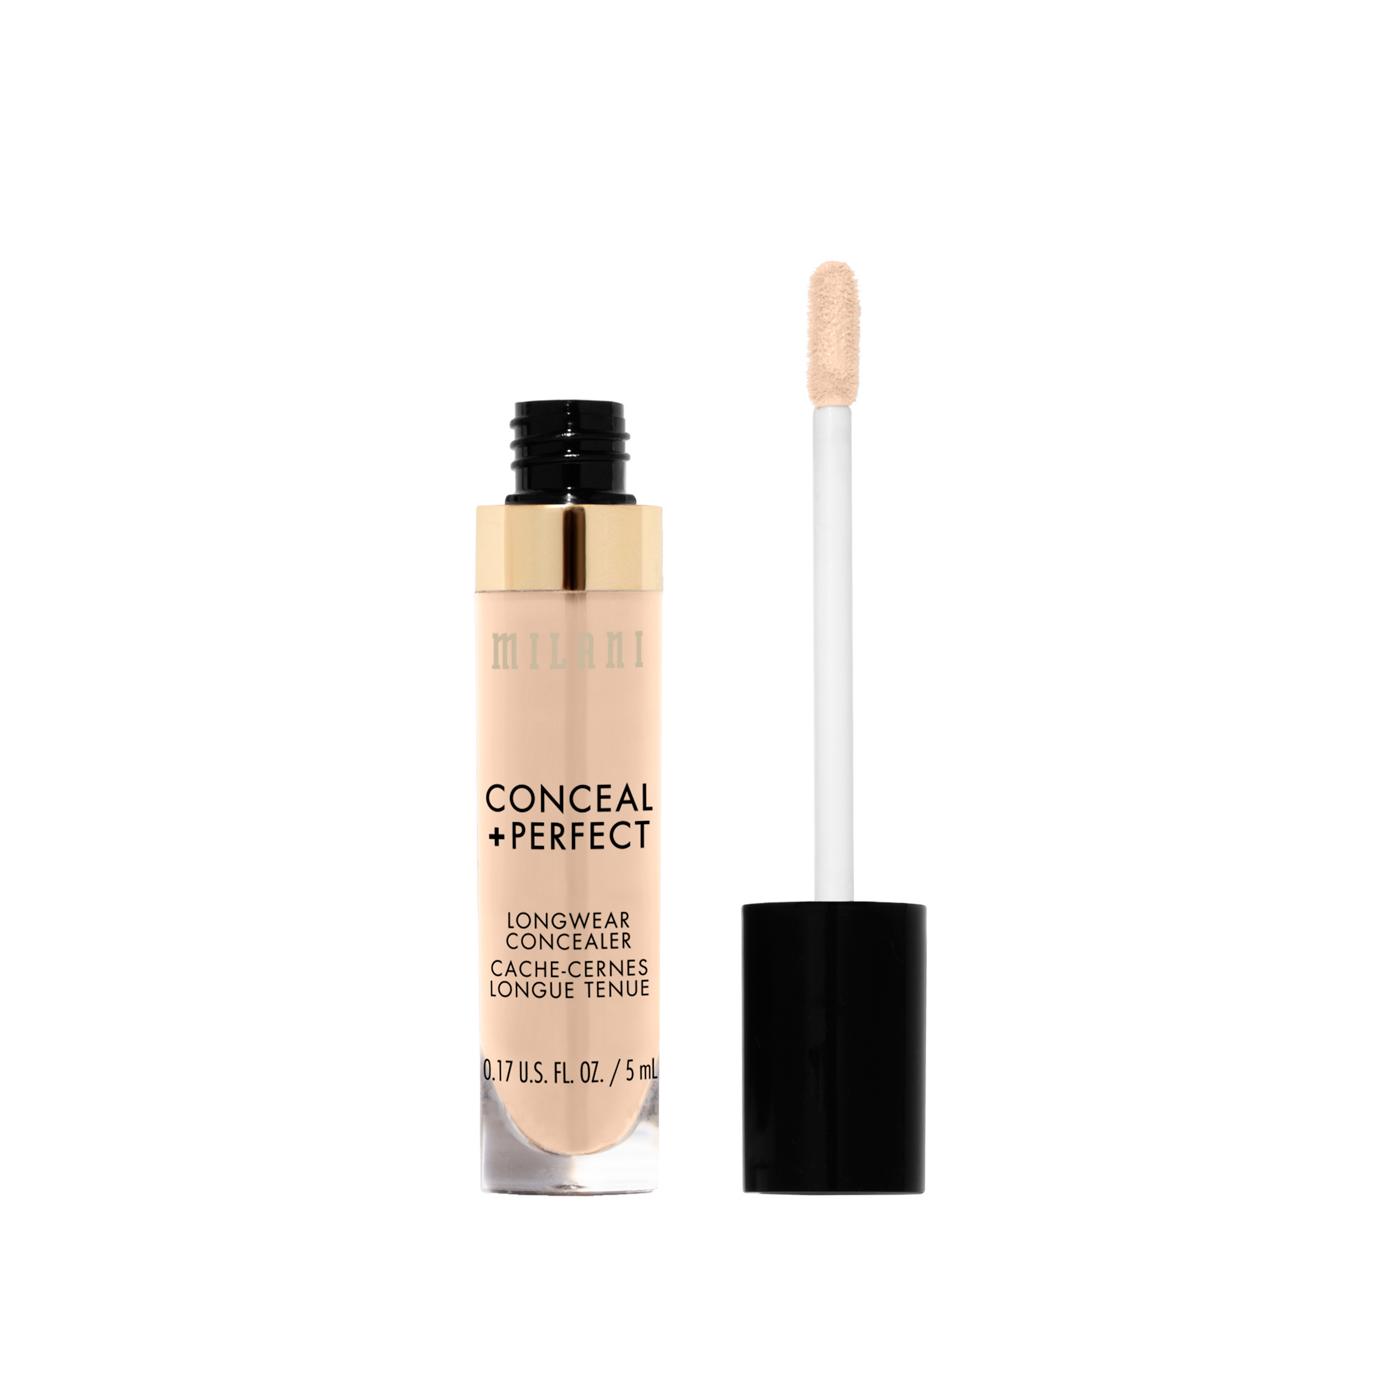 Milani Conceal +Perfect Longwear Concealer - Nude Ivory; image 10 of 10